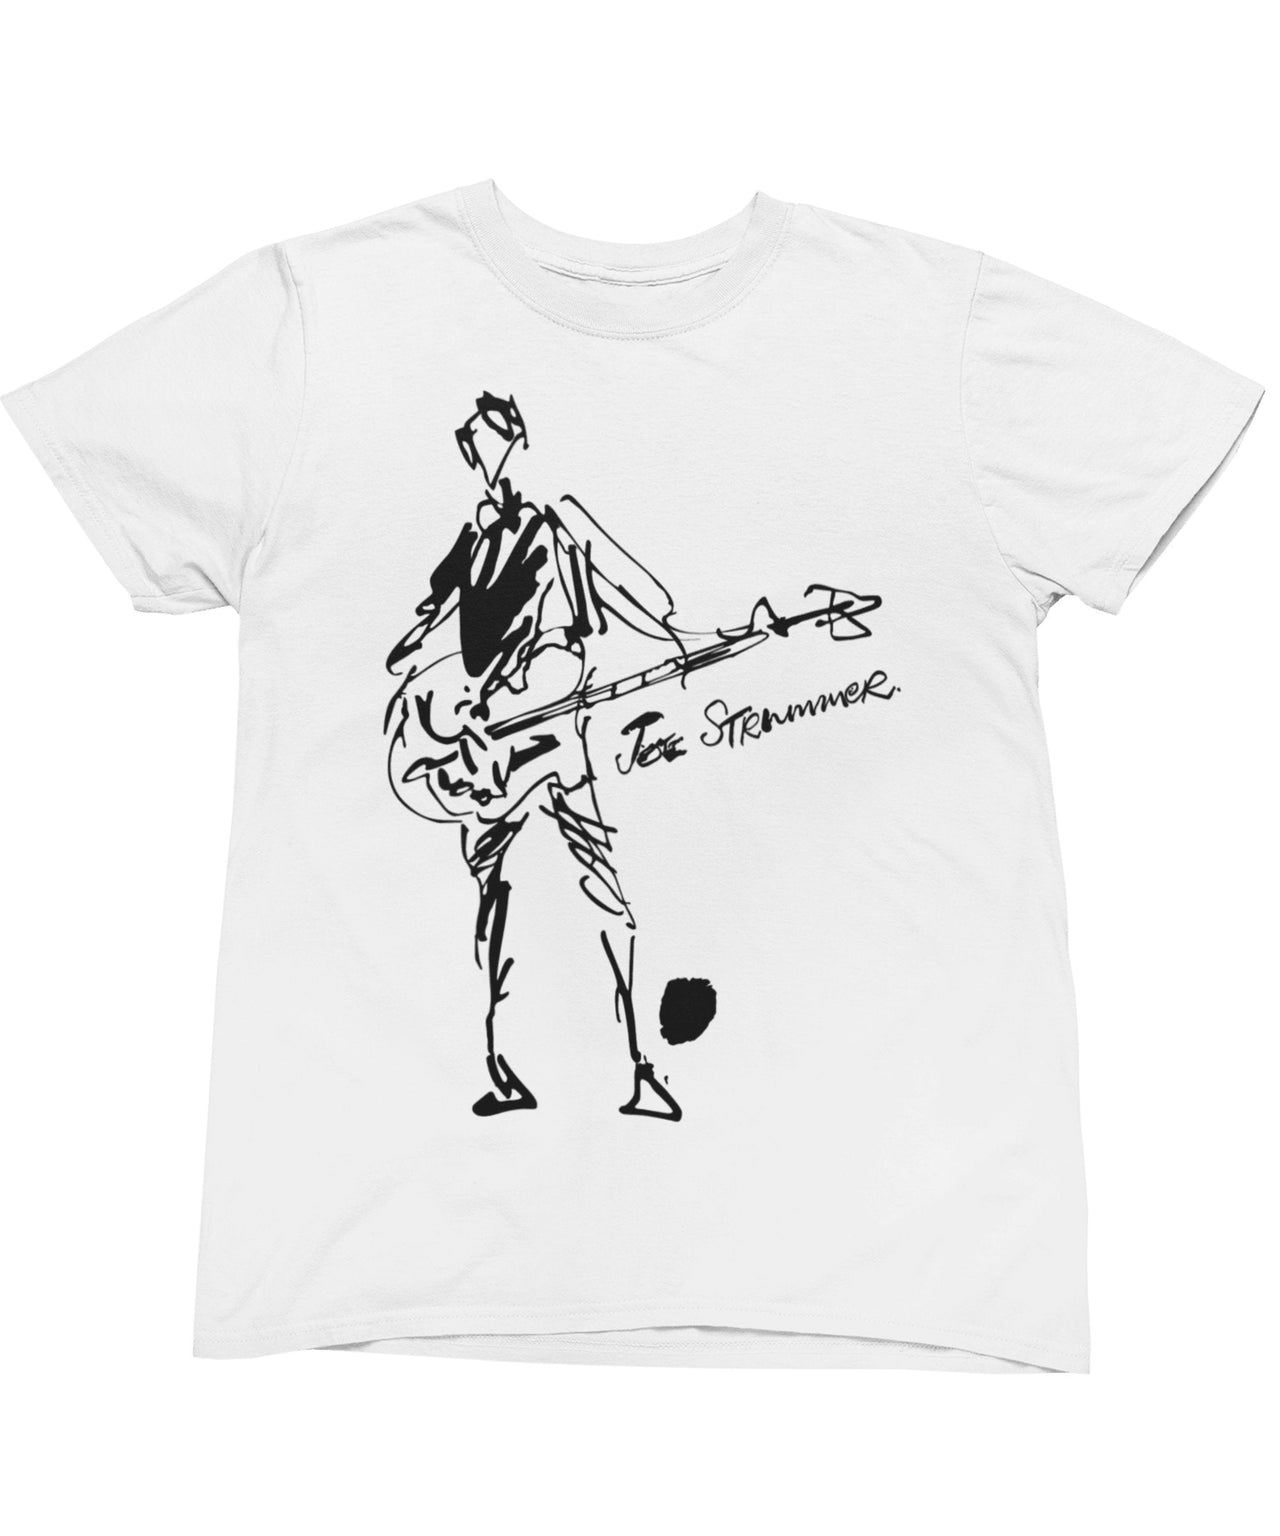 The Clash Joe Strummer Sound Check By Ray Lowry T-Shirt For Men 8Ball